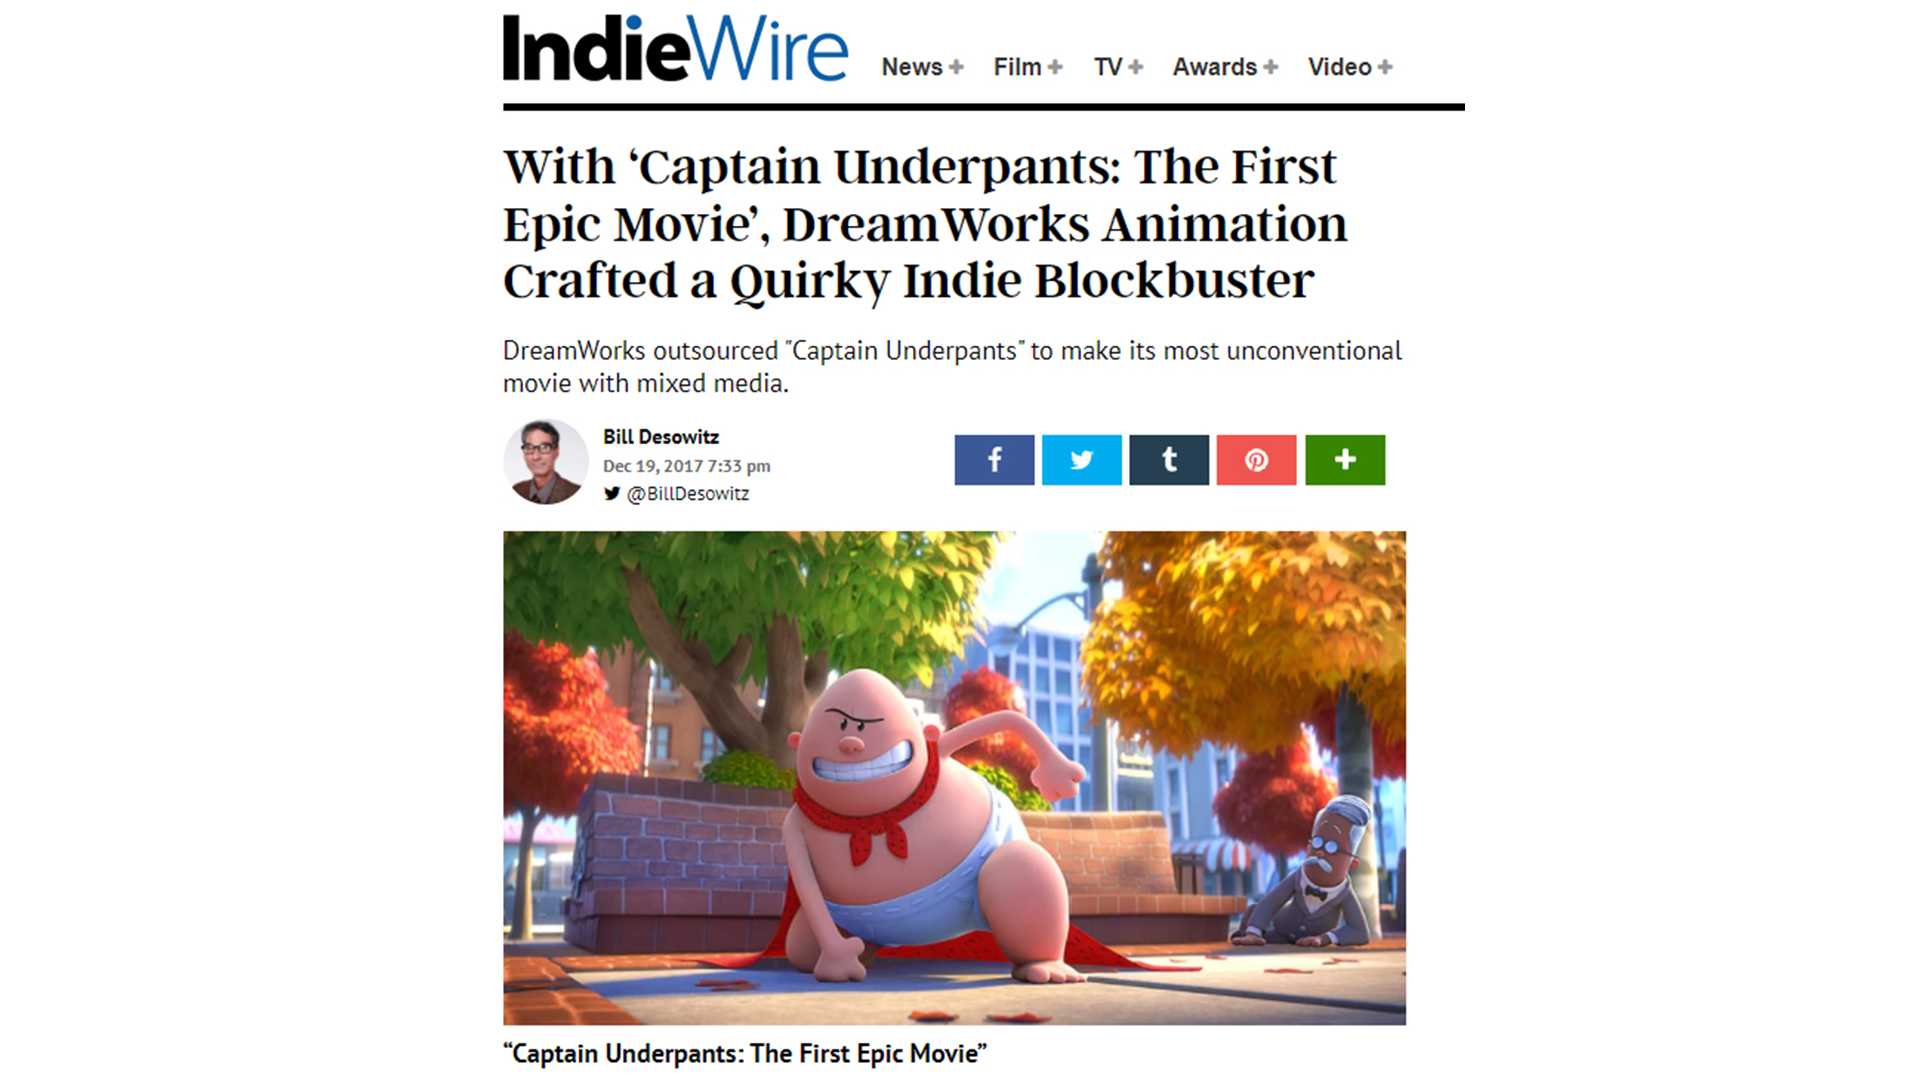 DREAMWORKS' CAPTAIN UNDERPANTS OUTSOURCED TO MIKROS - Mikros Animation